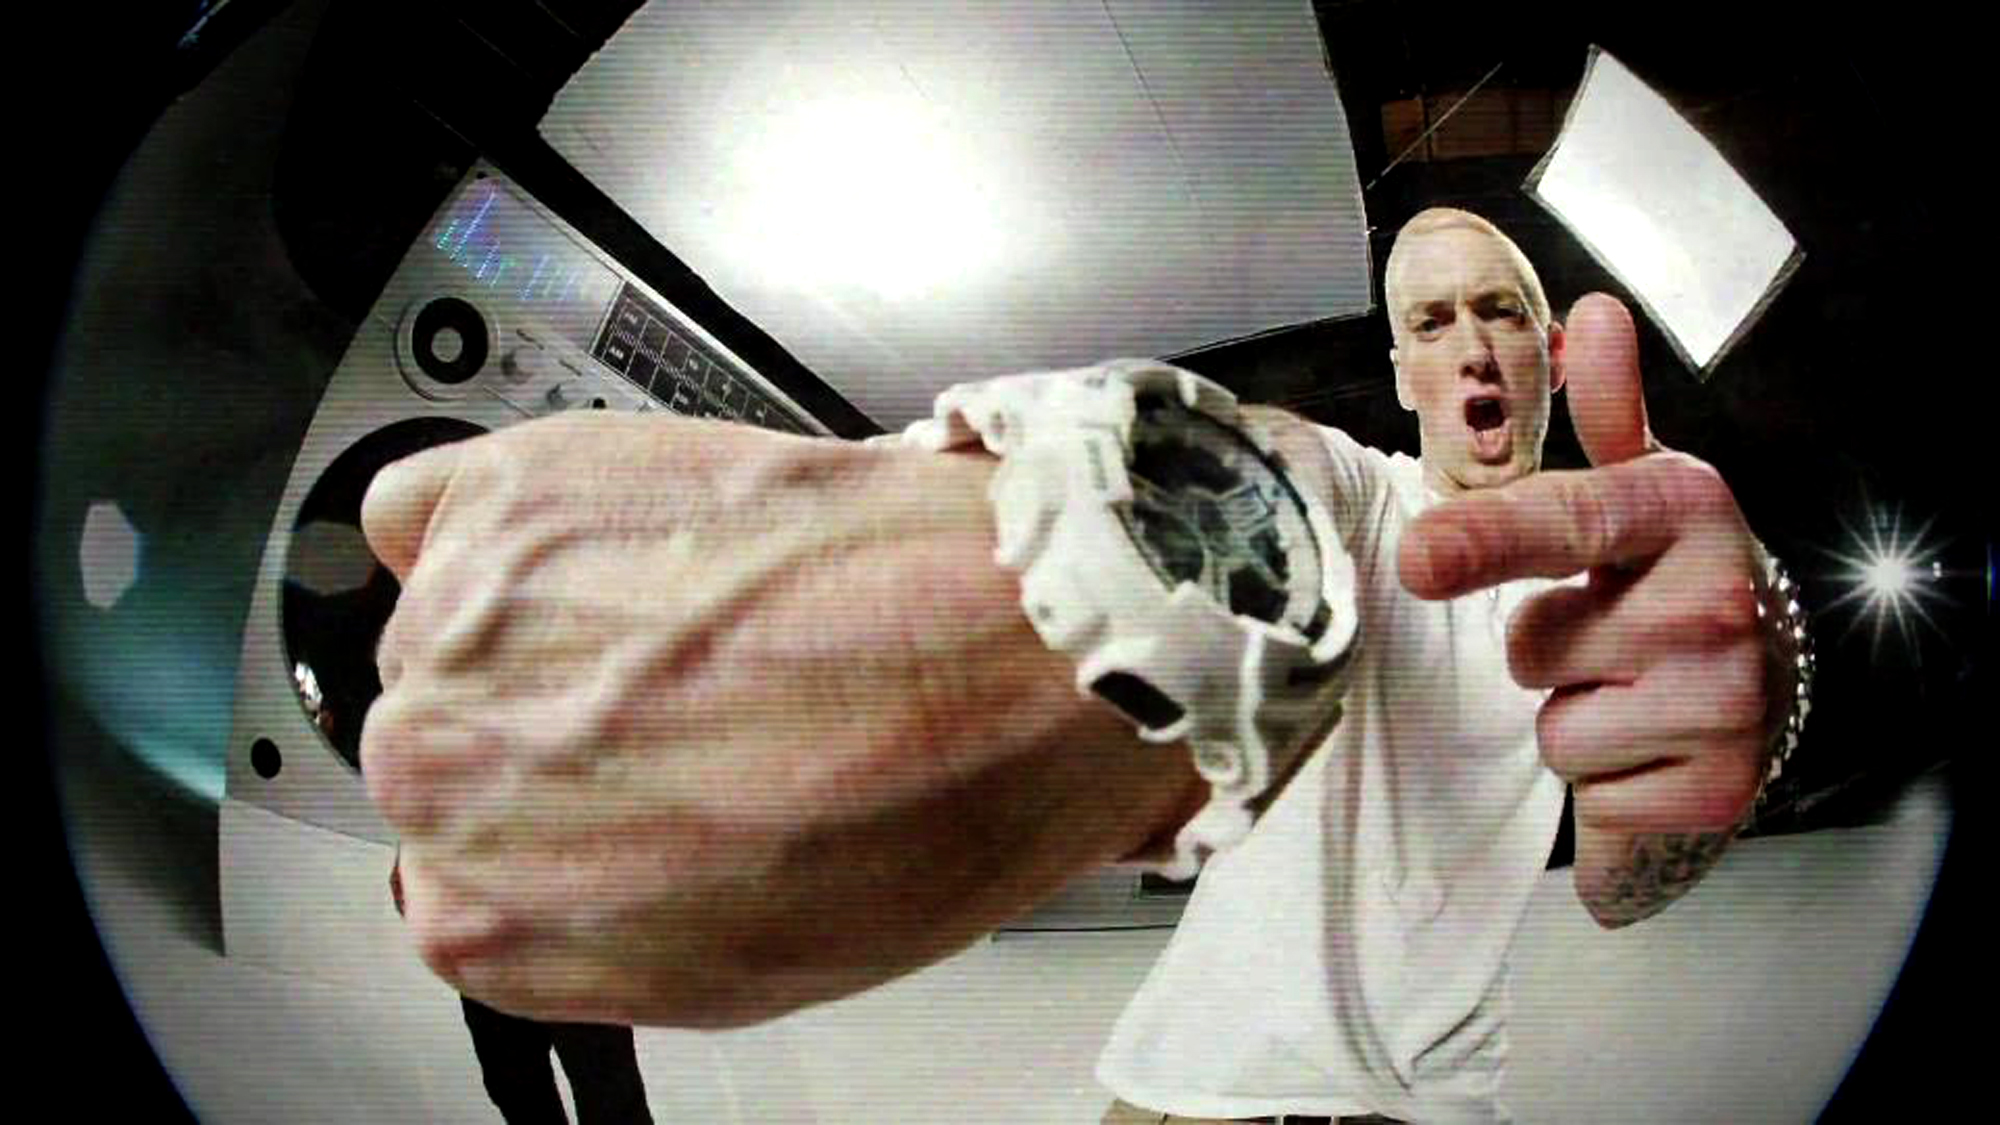 Eminem – “Berzerk” Has Reached 200 Million Streams On Spotify   - the biggest and most trusted source of Eminem